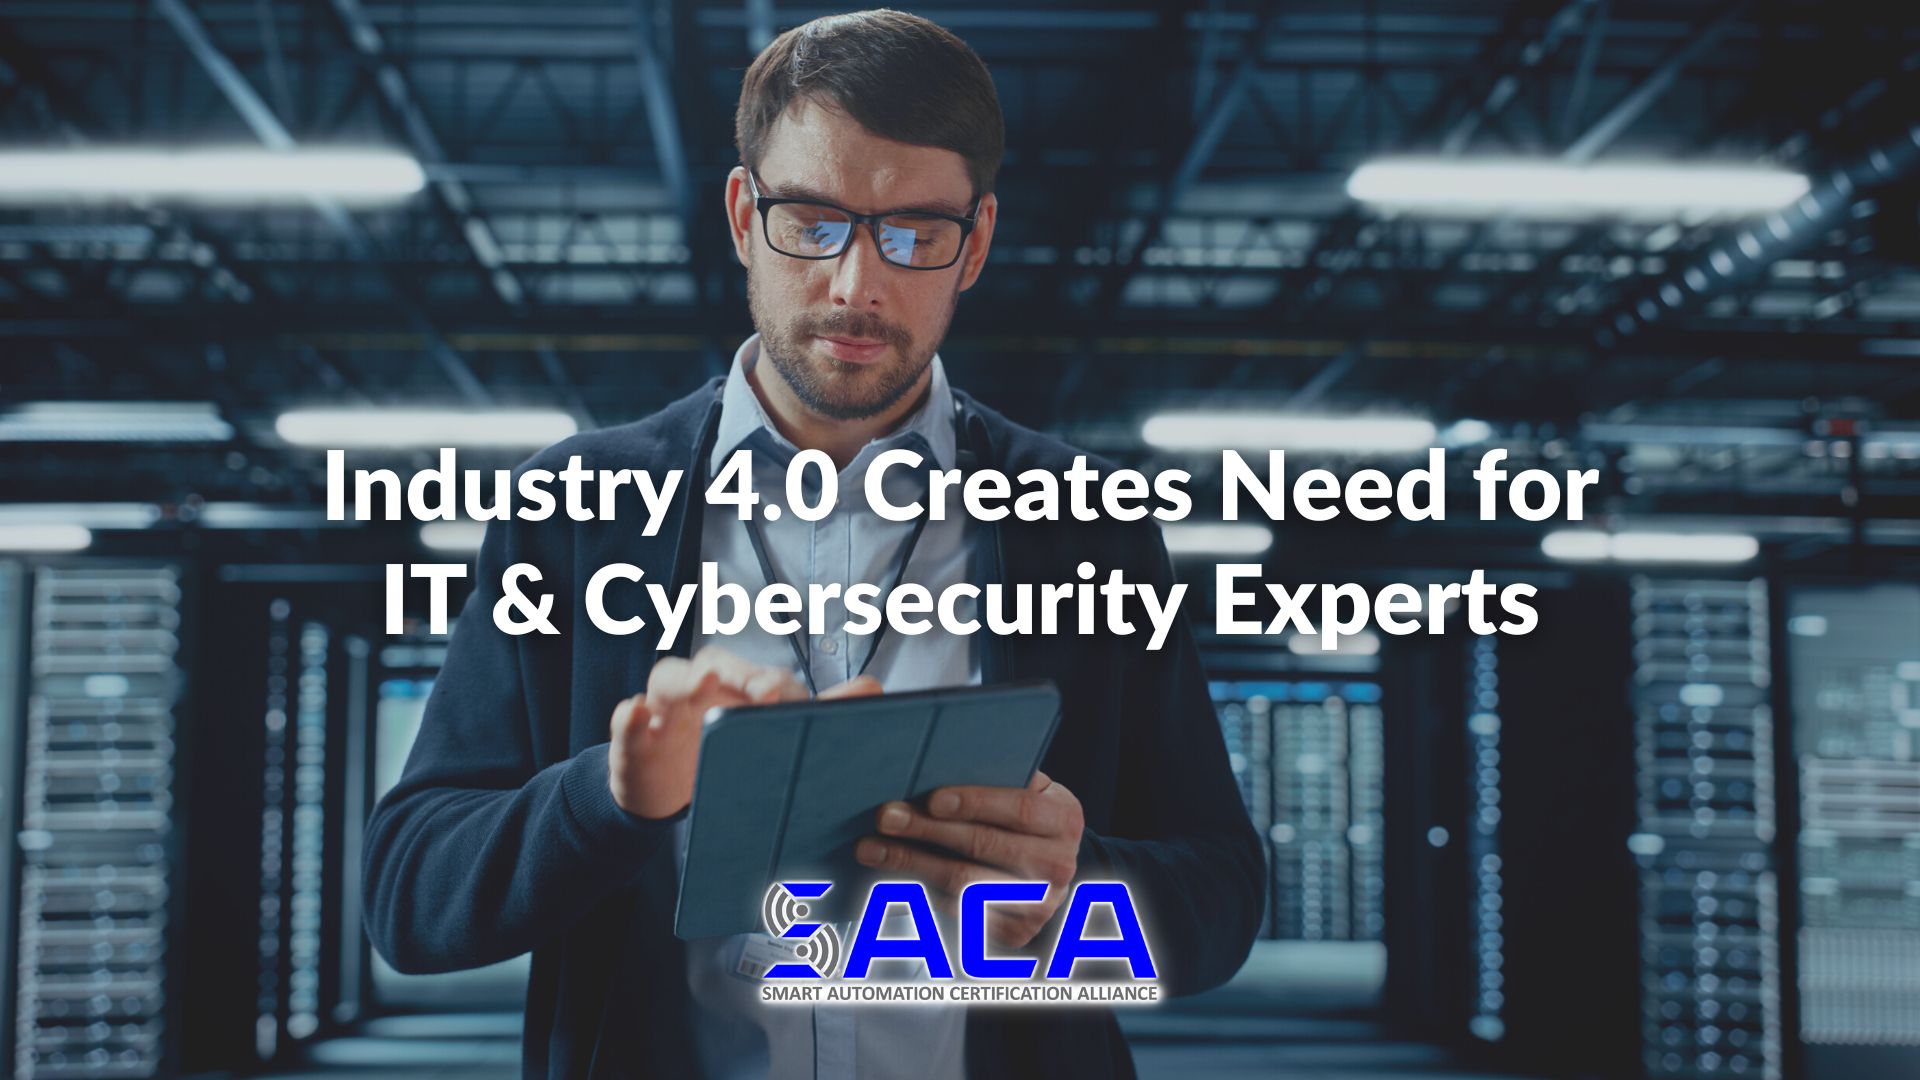 SACA - Industry 4.0 Creates Need for IT & Cybersecurity Experts